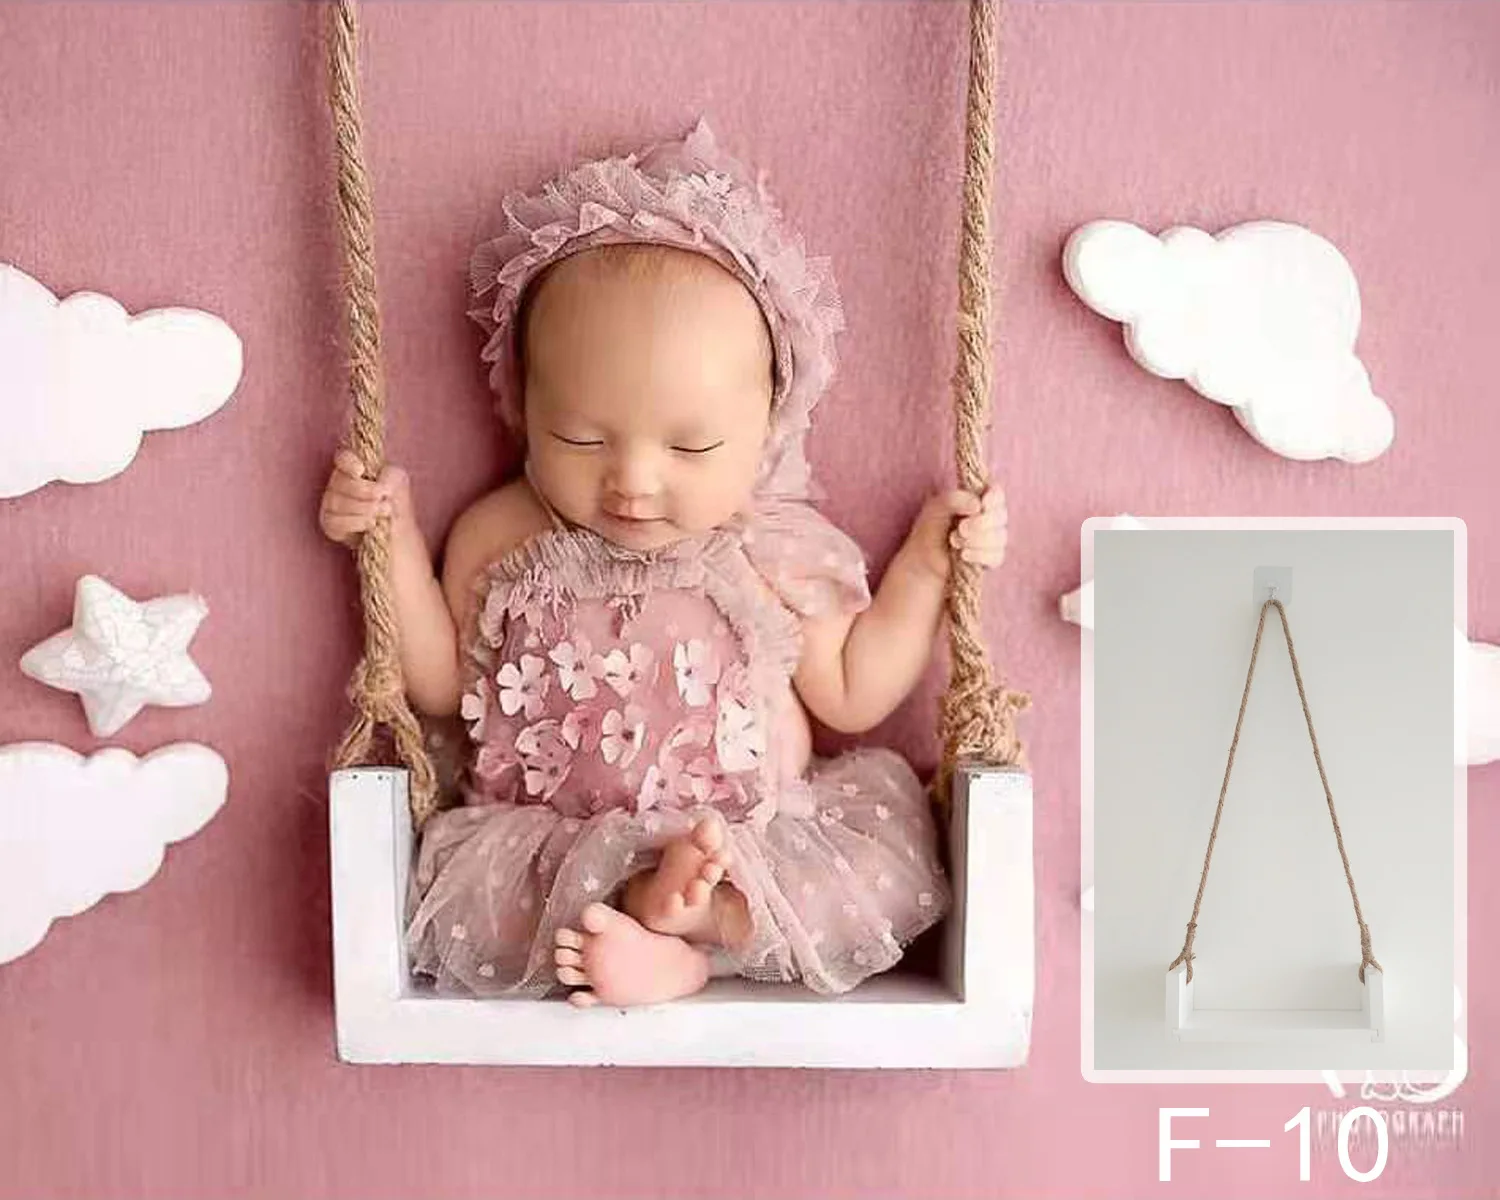 Infant Children's Hanging Photography Props Swing Chair Net Red Basket  Braided Rope Hammock Indoor Babies Accessories